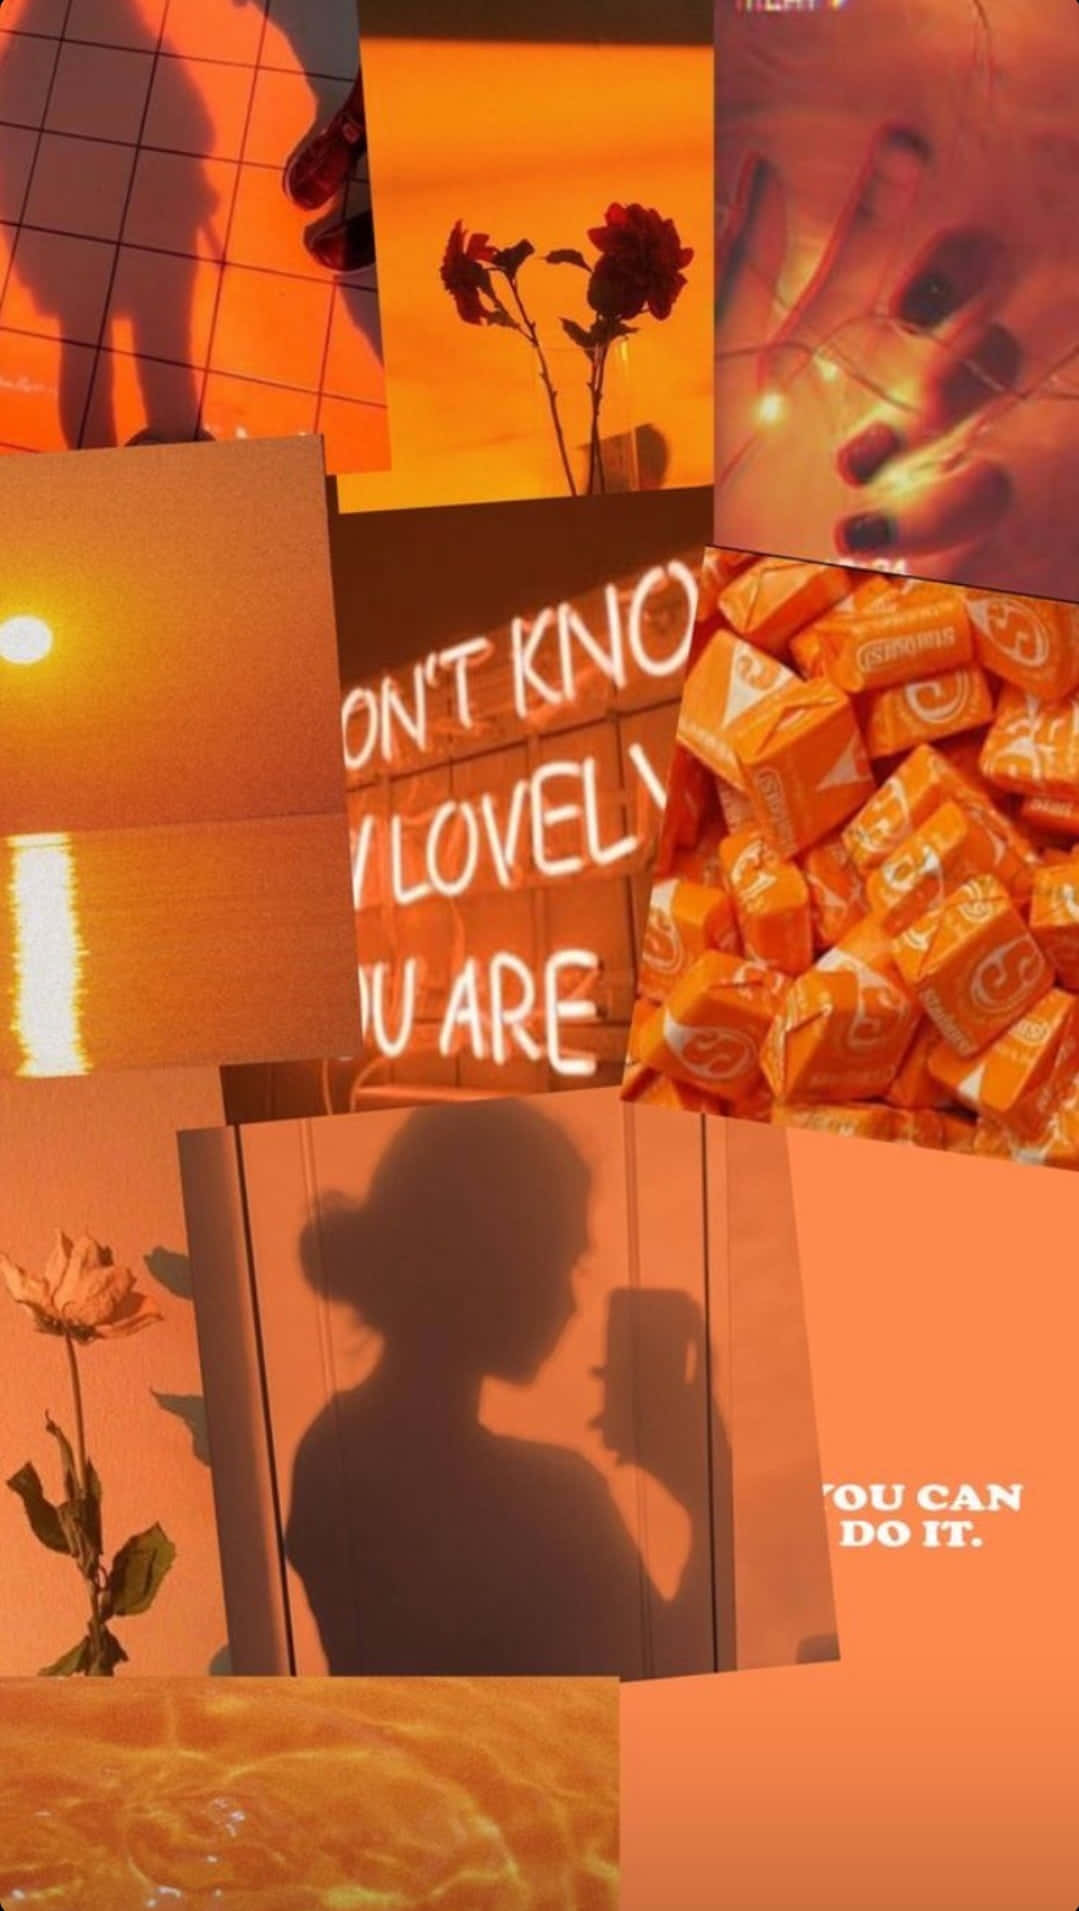 Get the positive energy you need with the inspiring Orange Aesthetic